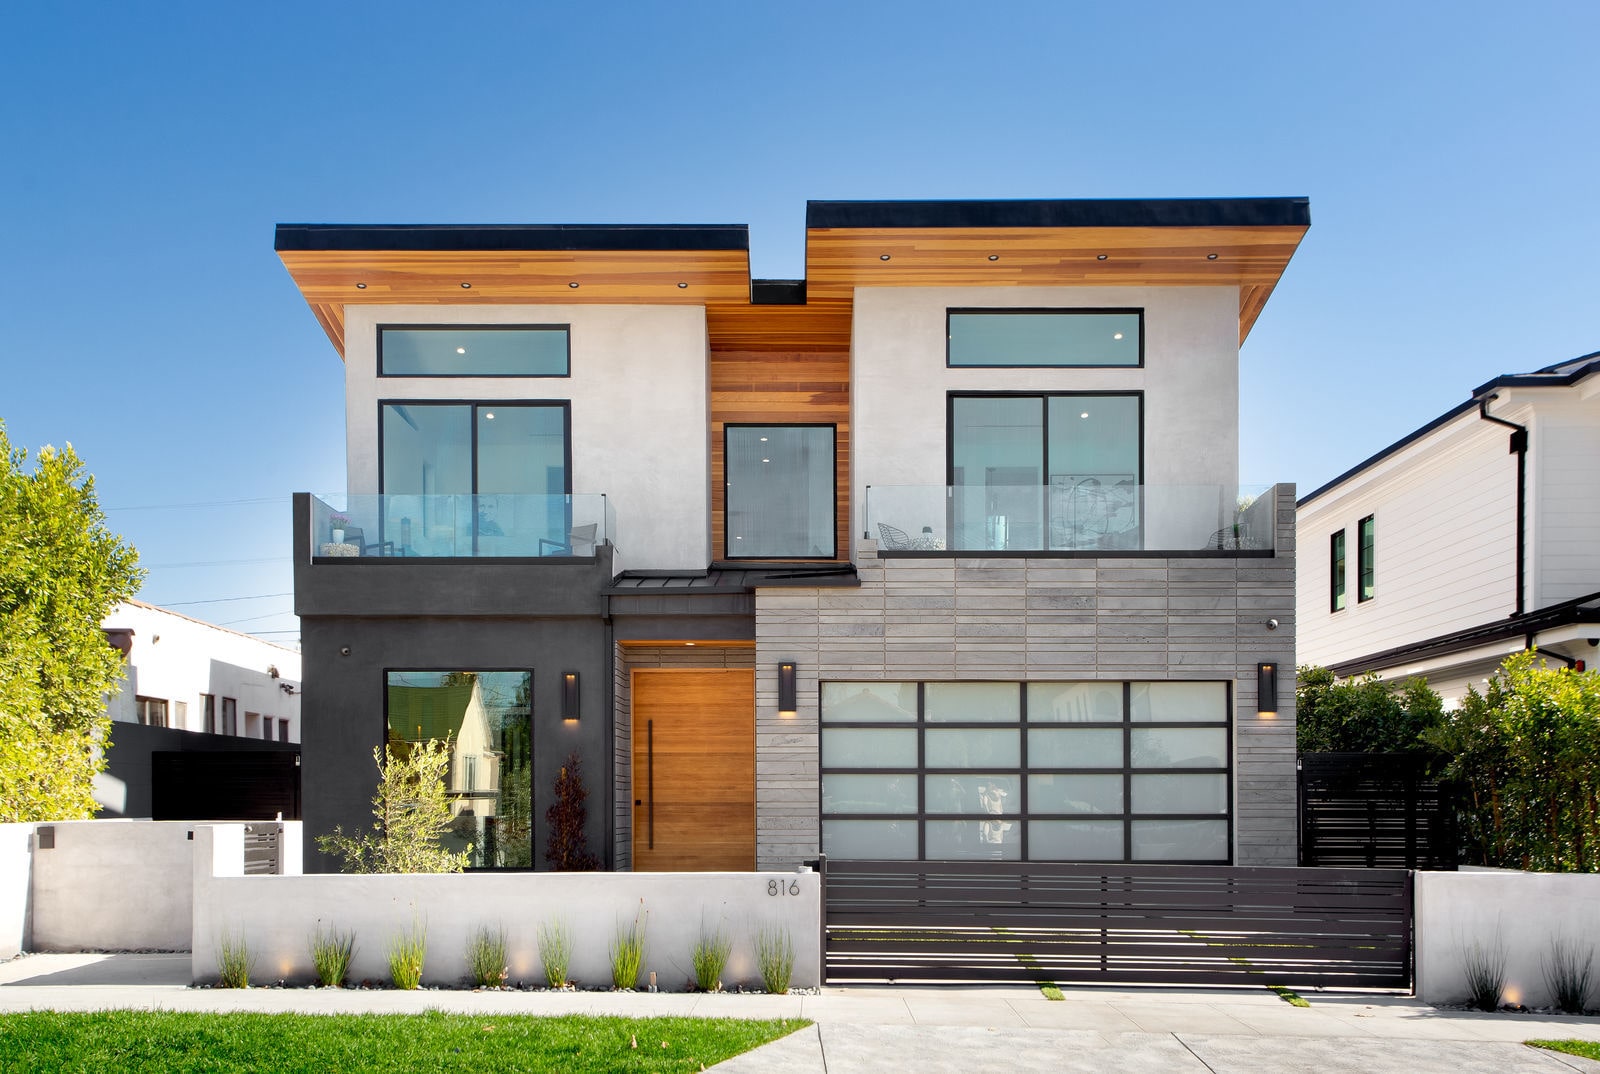 Norstone Platinum Planc Large Format Tile on the front facade of a modern California home